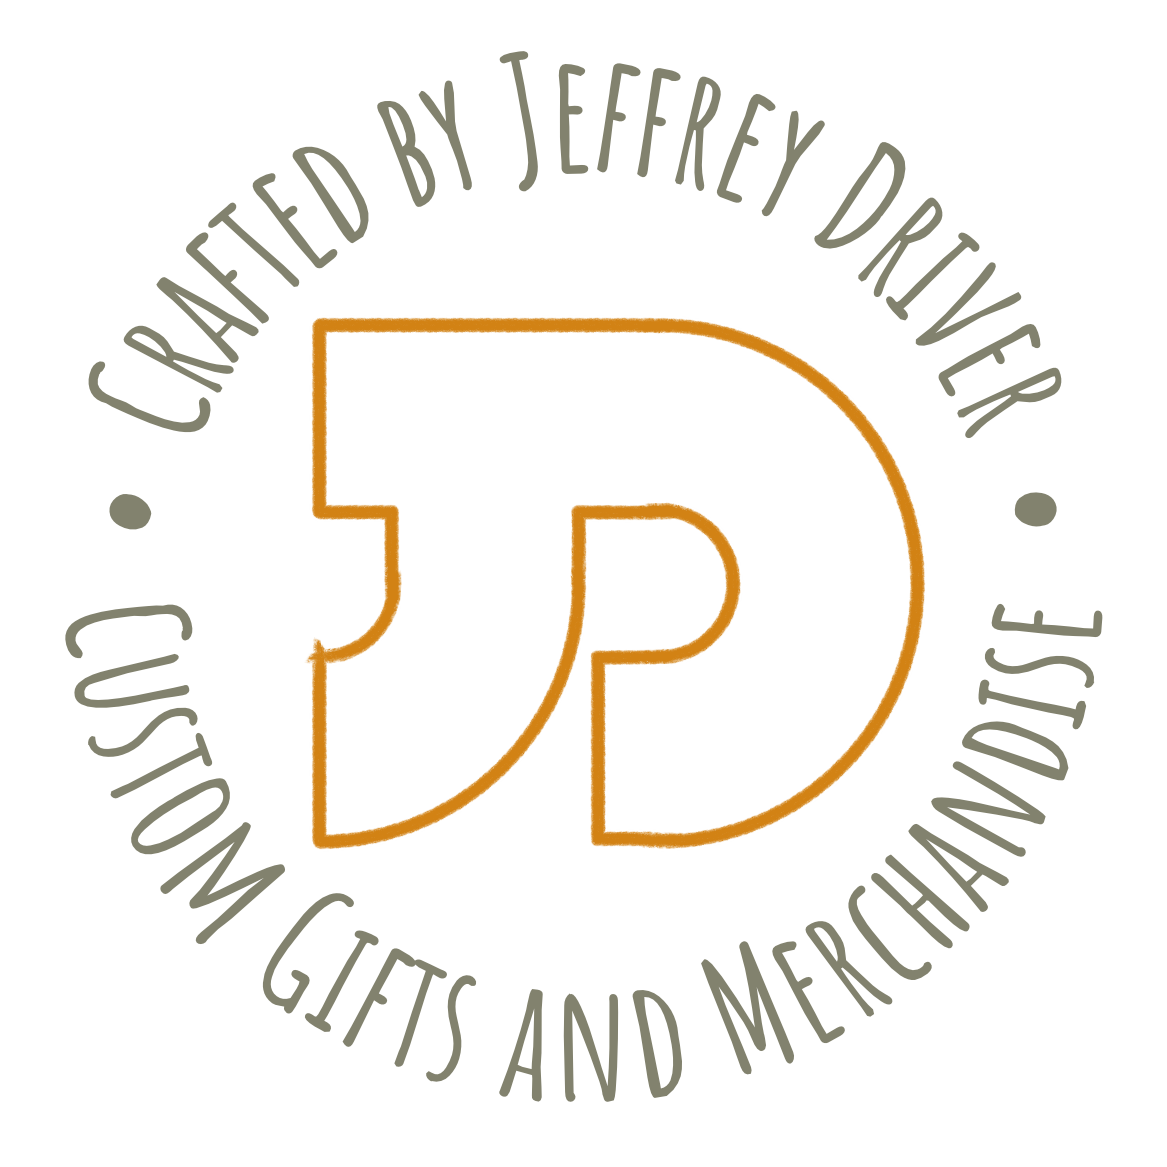 Crafted by Jeffrey Driver Logo